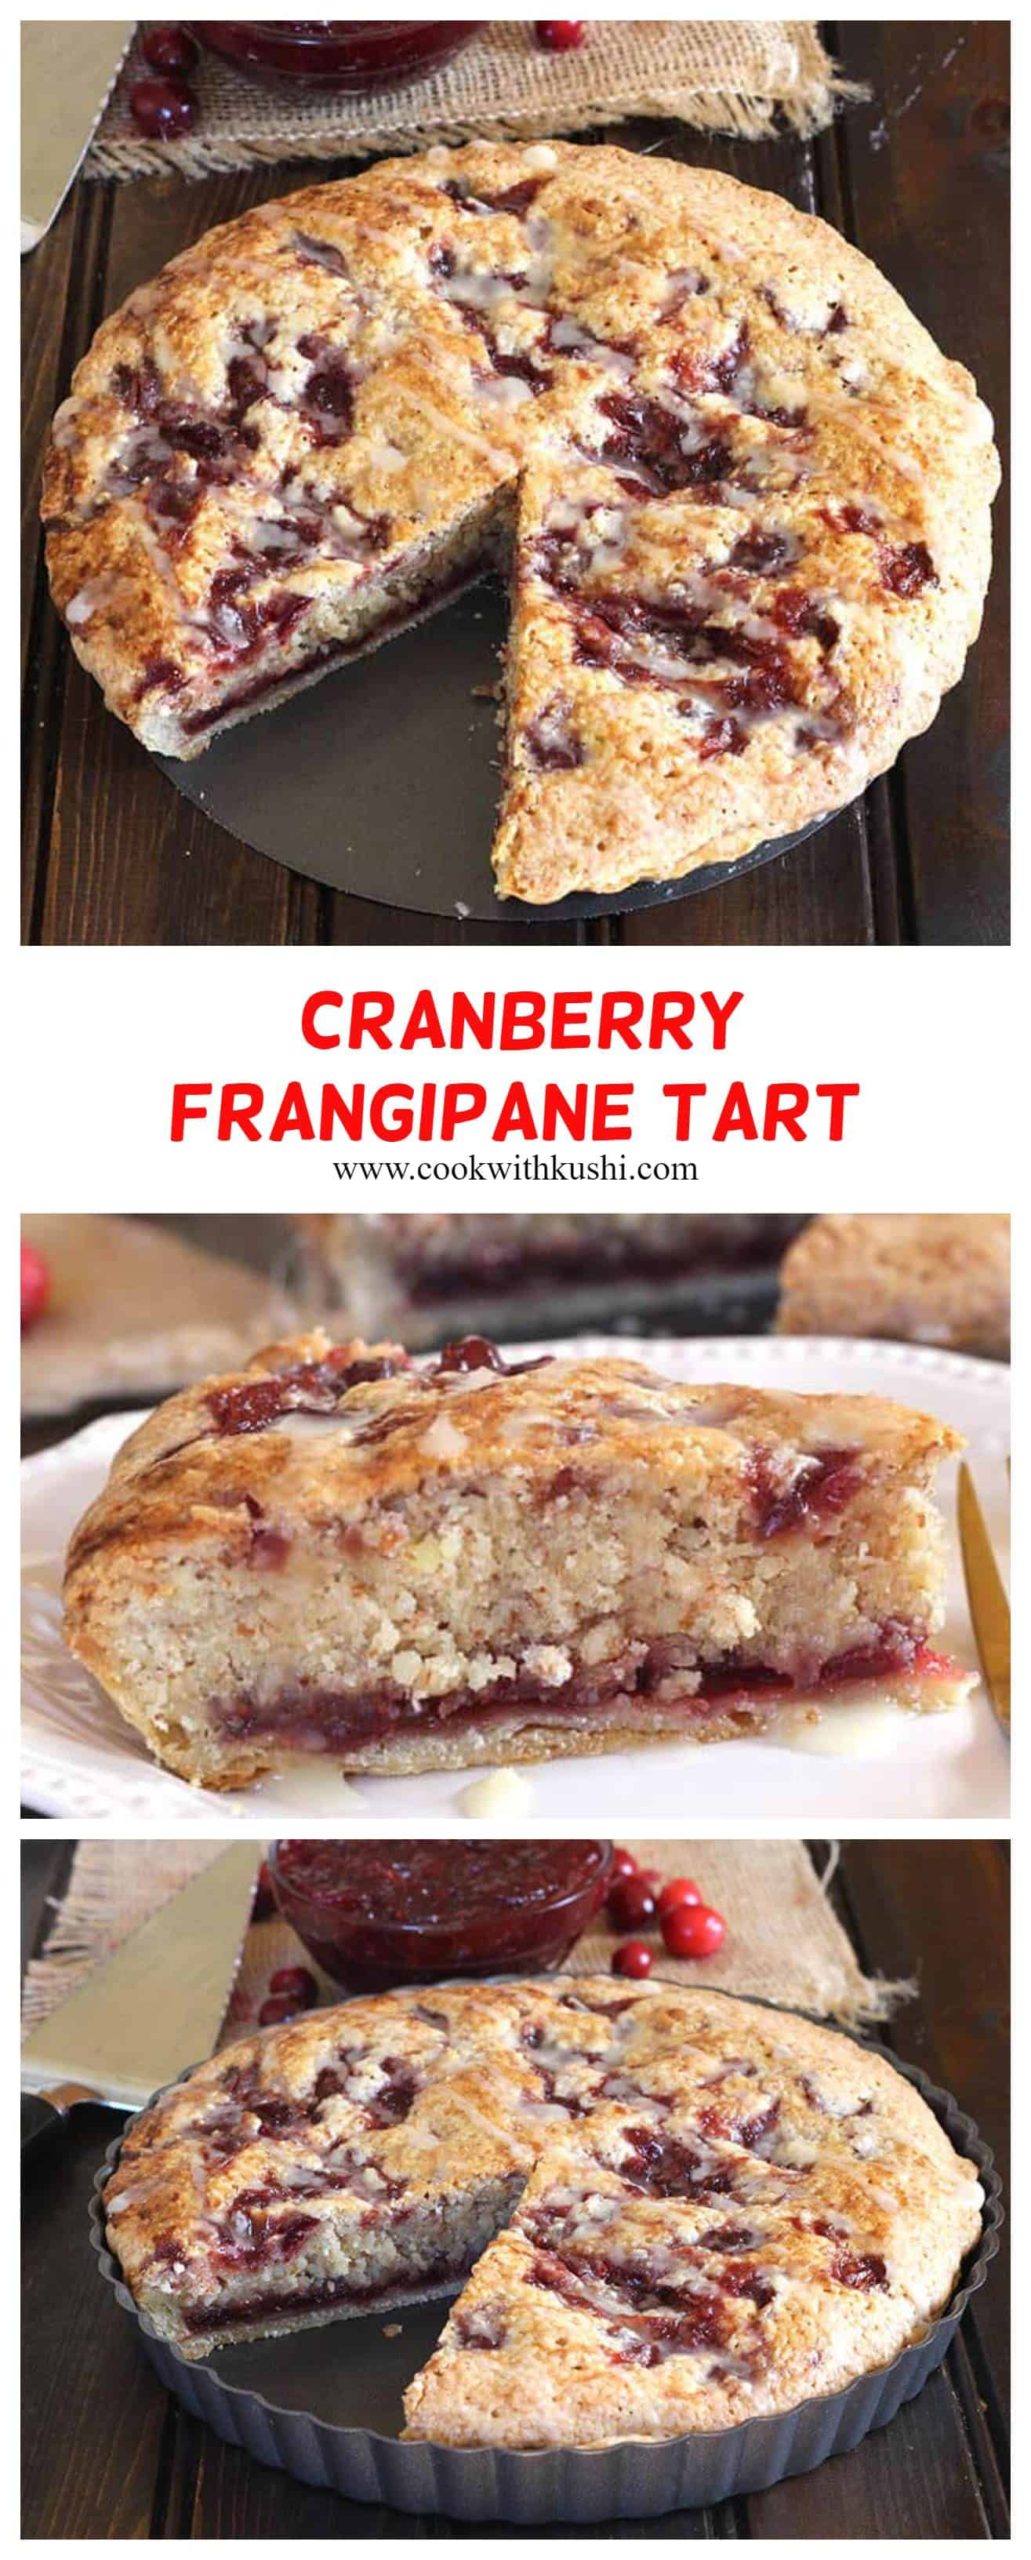 Cranberry Frangipane Tart is a classic and irresistibly delicious fancy dessert one must have at their dinner table this Thanksgiving or Christmas. The edges of this tart are crispy with fresh homemade crust and is filled with melt in mouth filling. It is so tasty that you will want to prepare it all through the year. #cranberries #cranberrydessert #thanksgiving #christmas #fruittart #tartpan #pierecipes #dessertrecipes #holidaybaking #shortcrustpastry